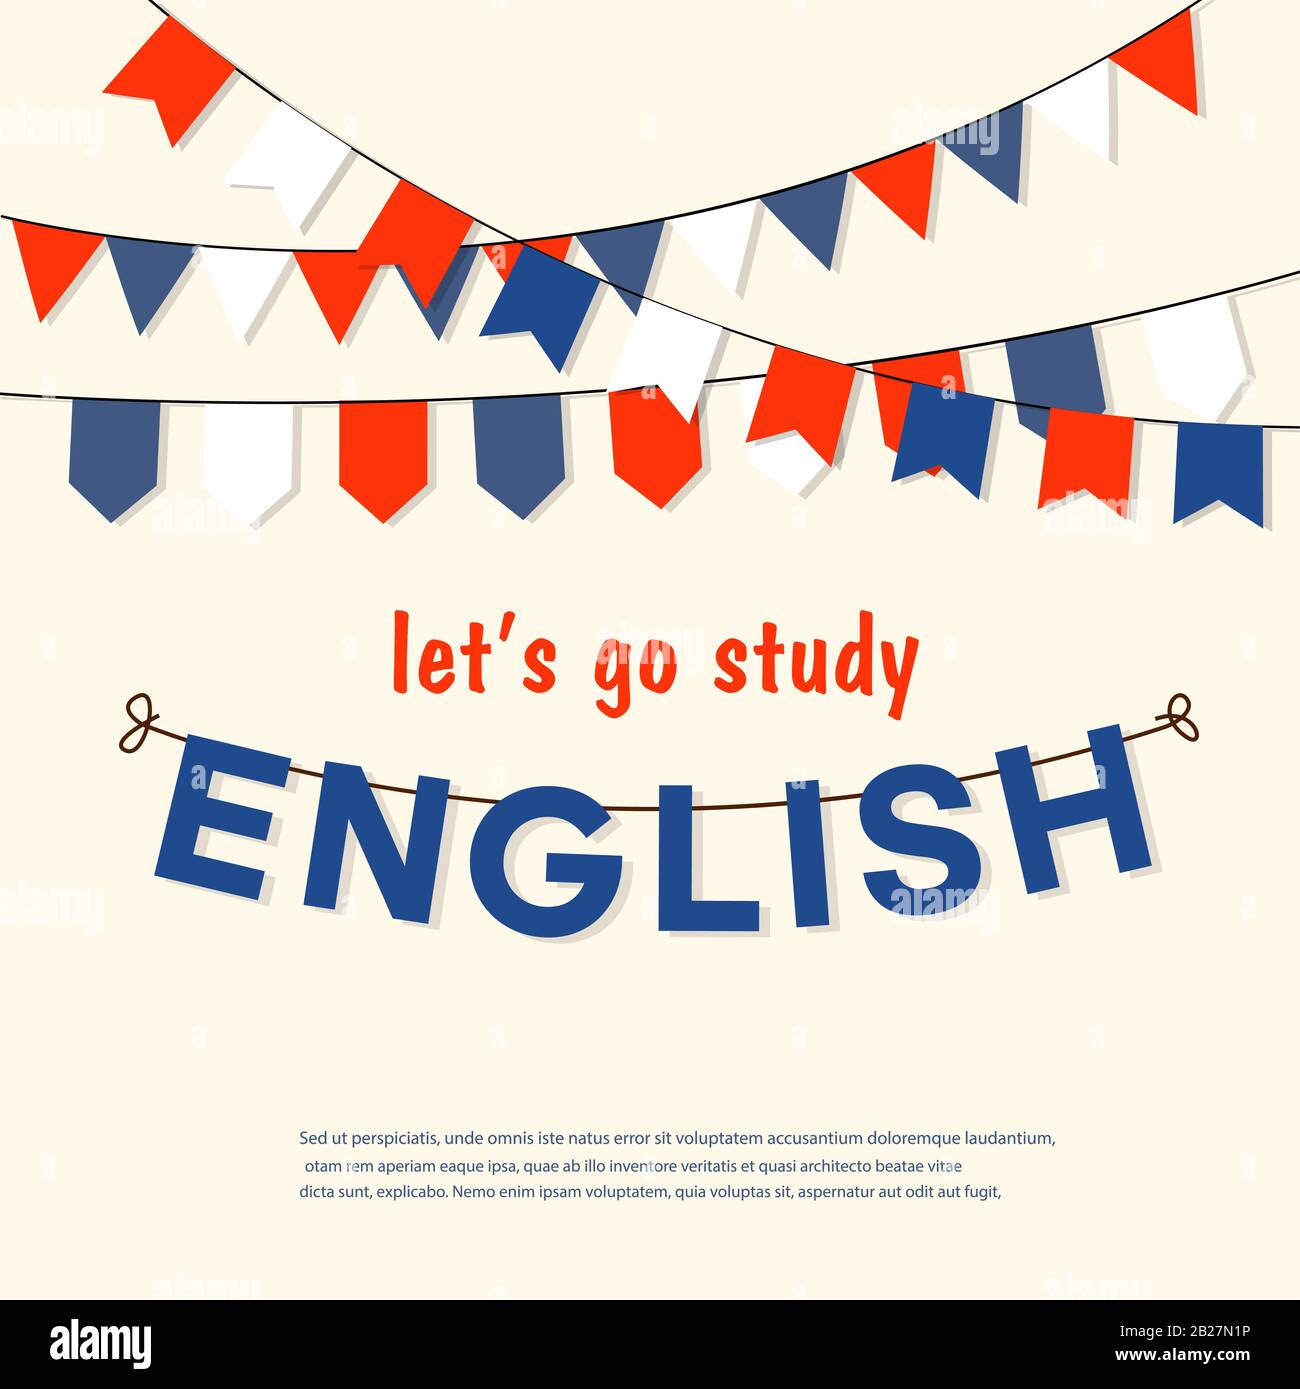 LET'S GO ENGLISH